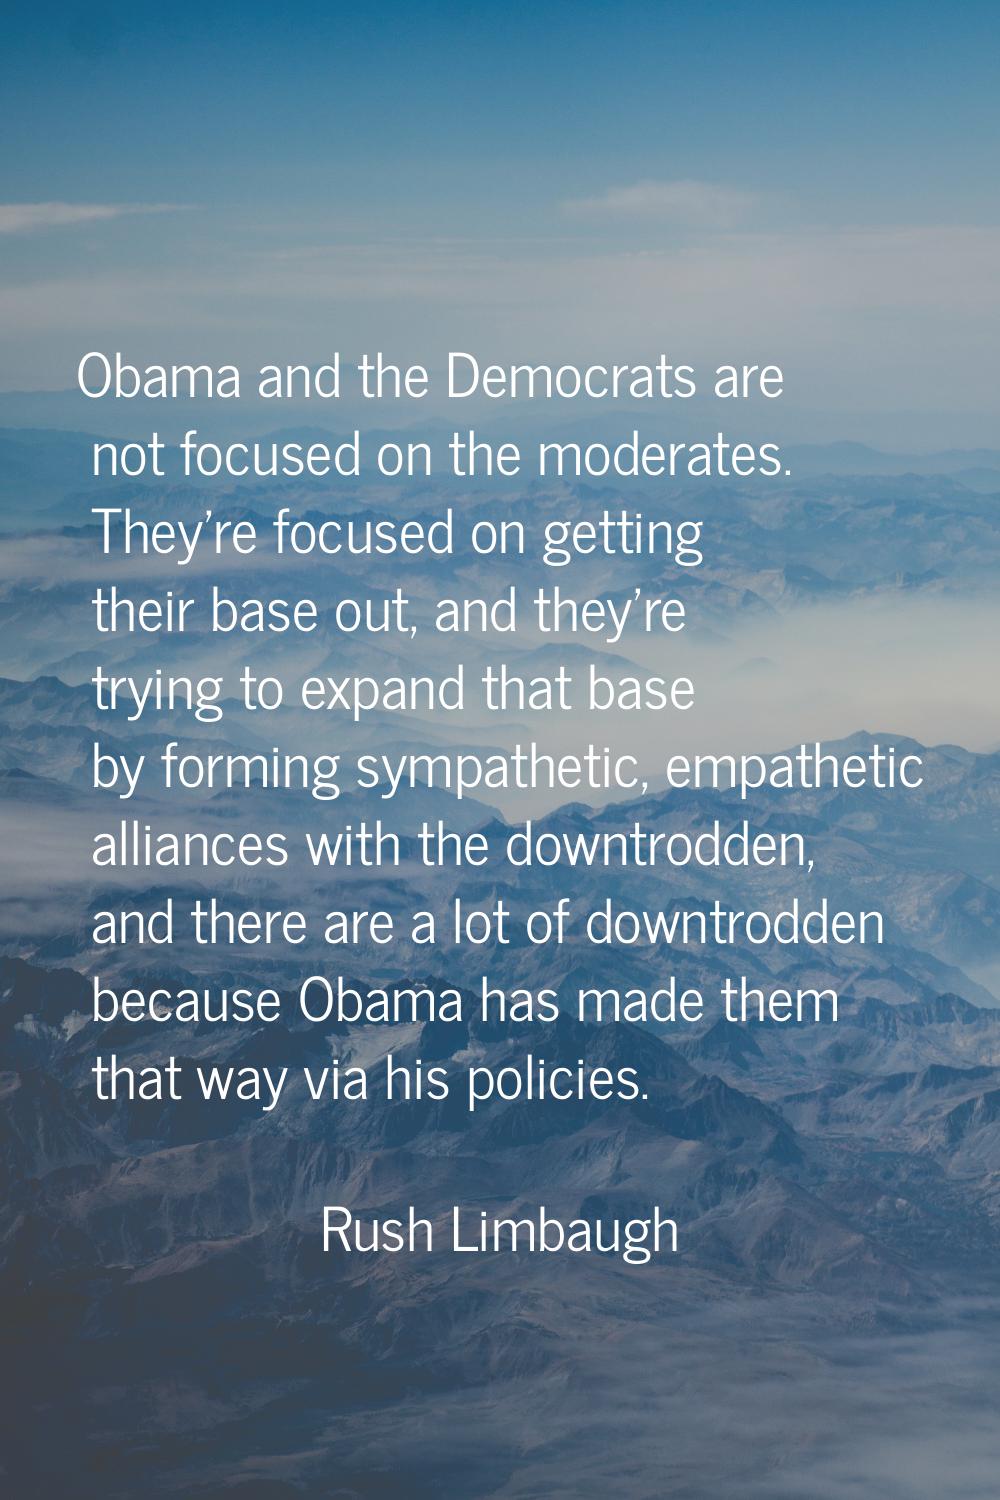 Obama and the Democrats are not focused on the moderates. They're focused on getting their base out